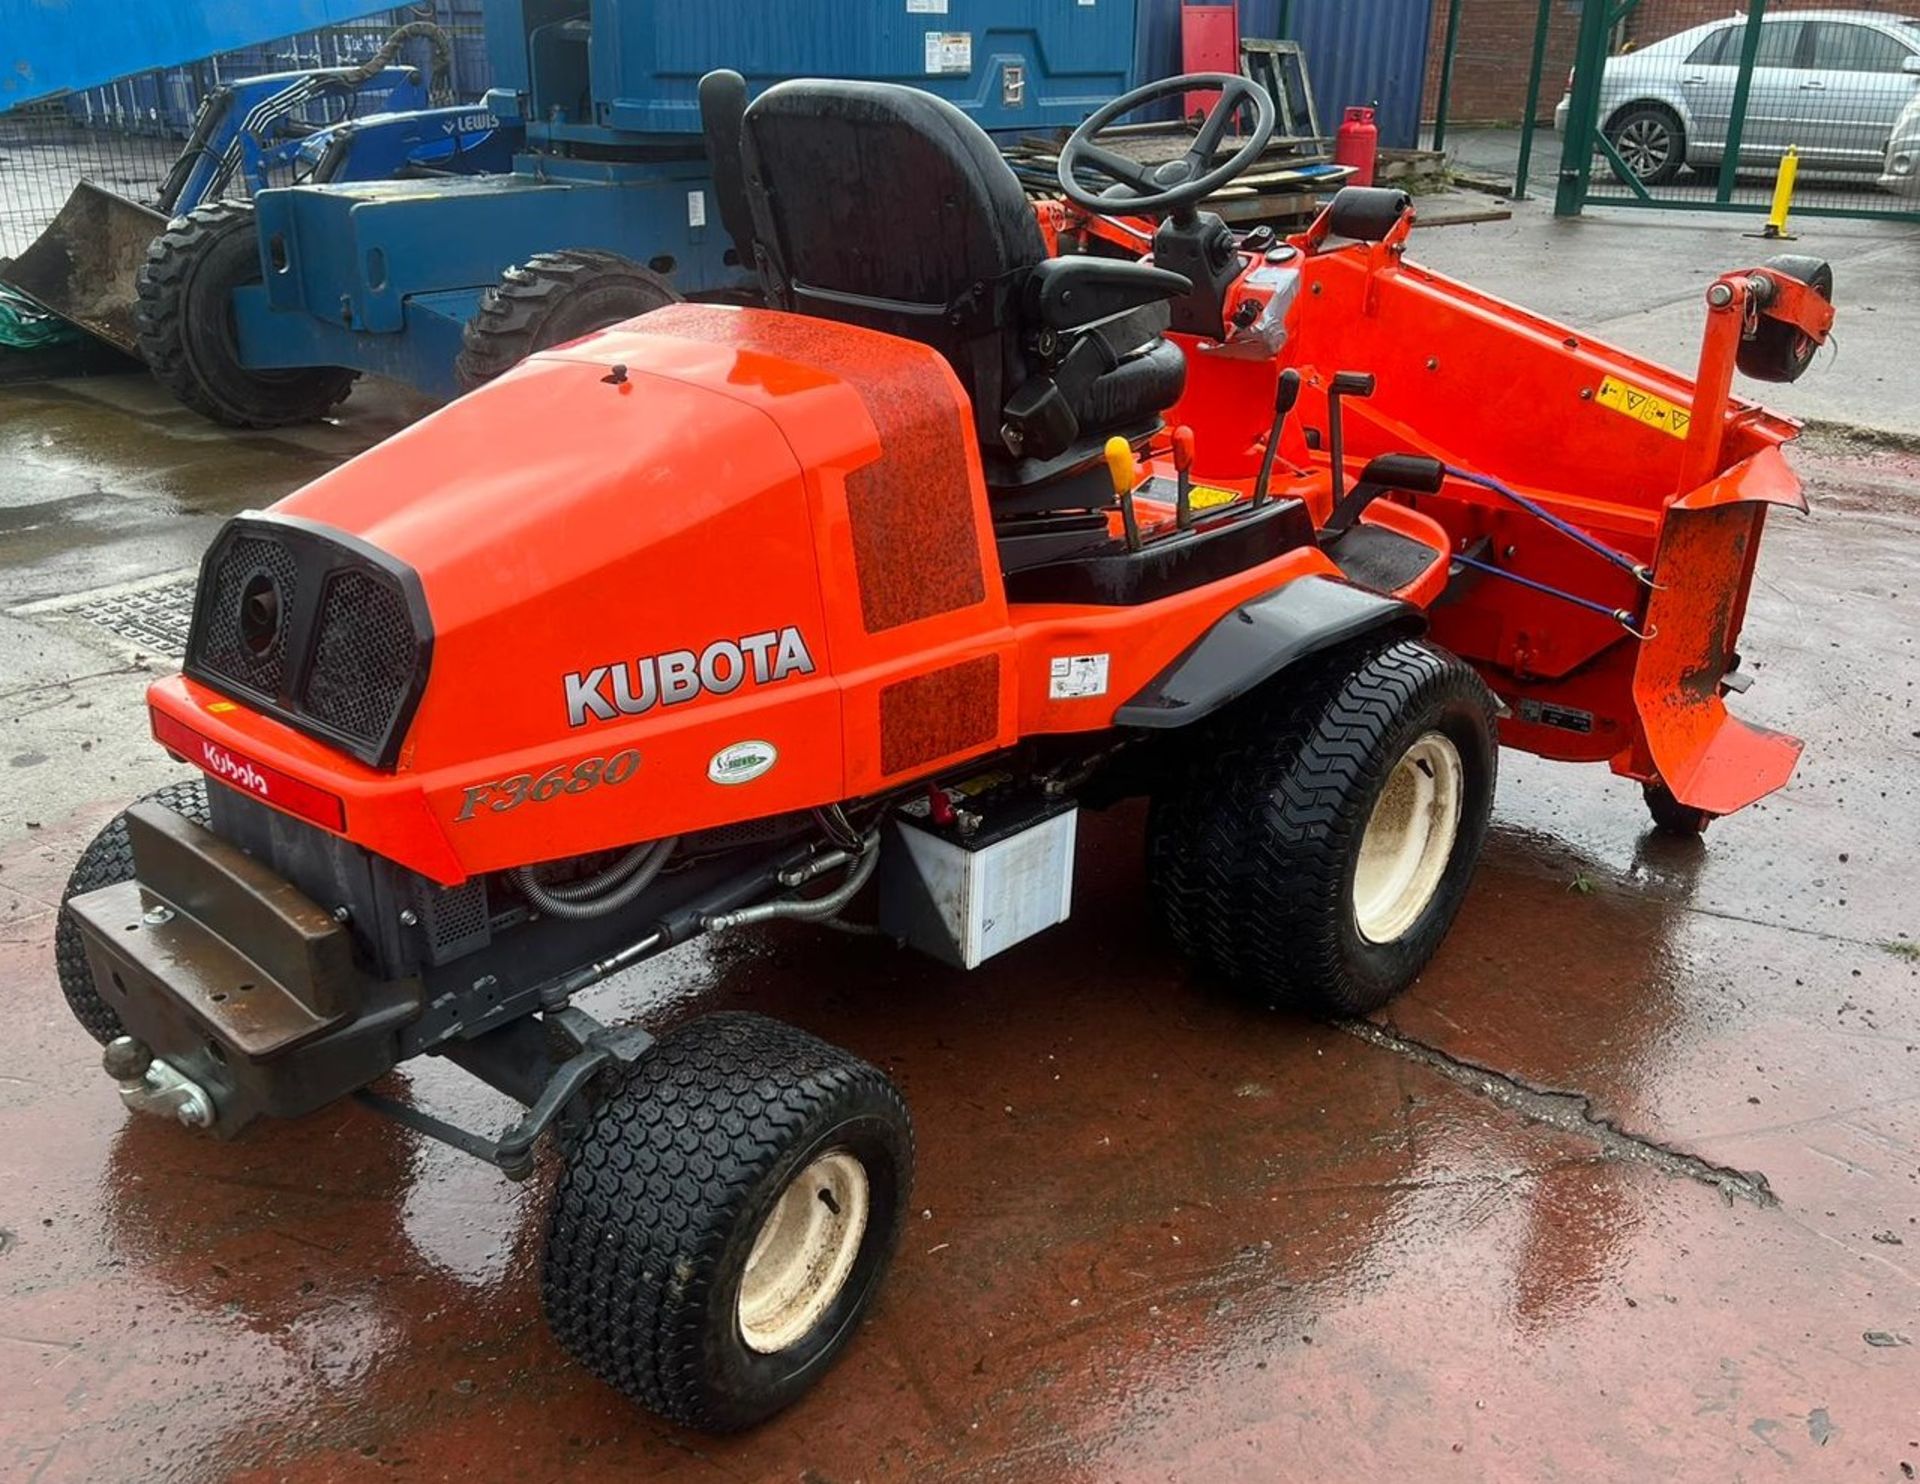 A Kubota F3680-EC 4WD Ride On Mower with 3 blade Mower Deck (one blade missing) and towing hitch, - Image 6 of 13